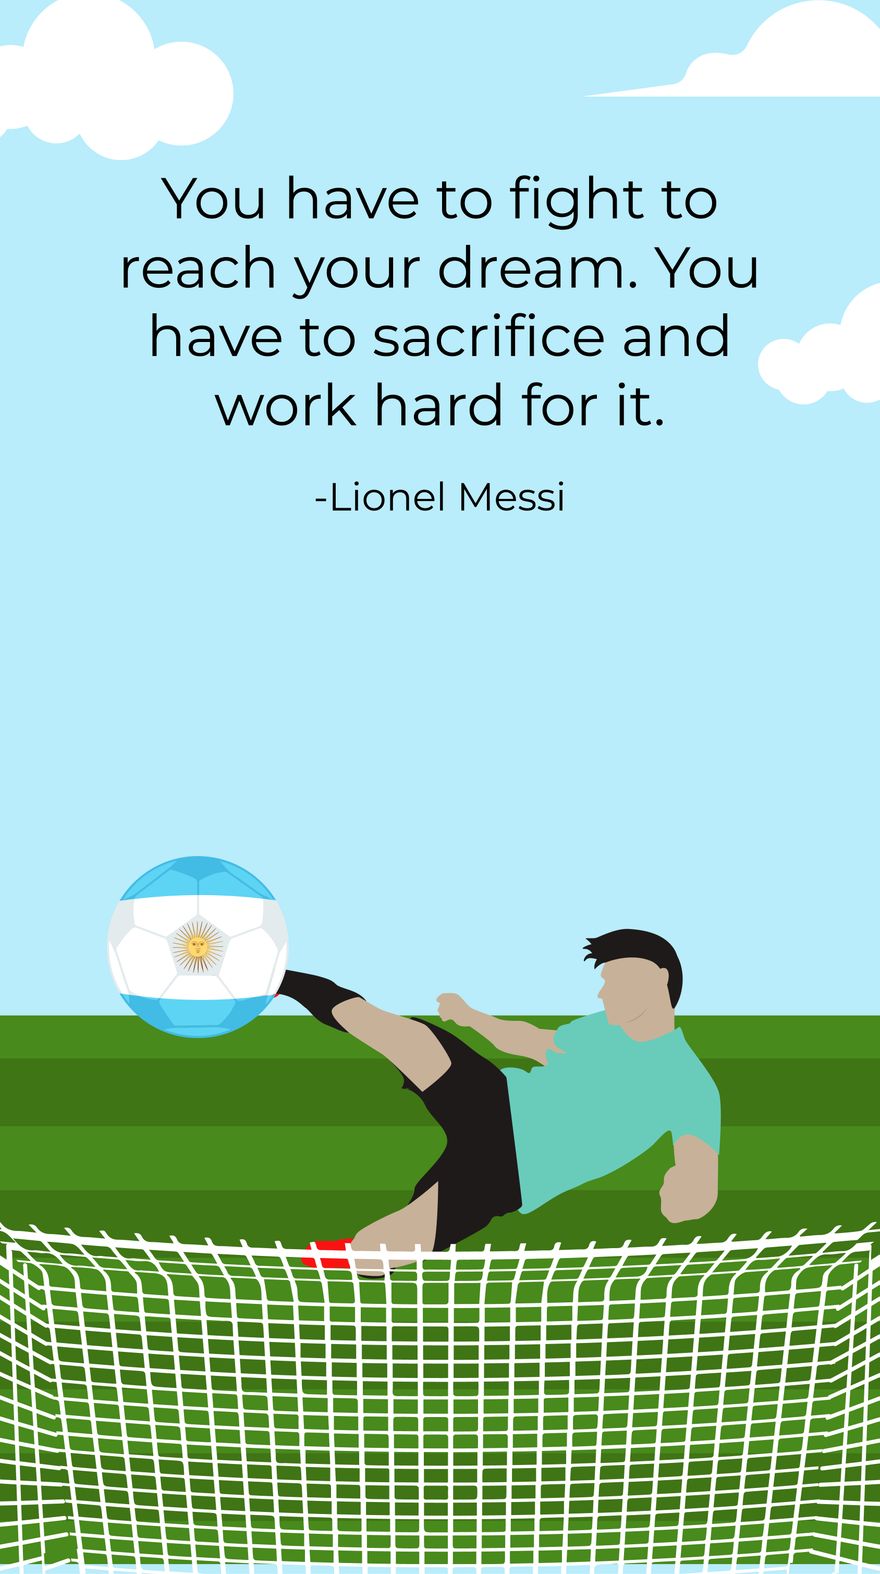 Lionel Messi - You have to fight to reach your dream. You have to sacrifice and work hard for it. in JPG